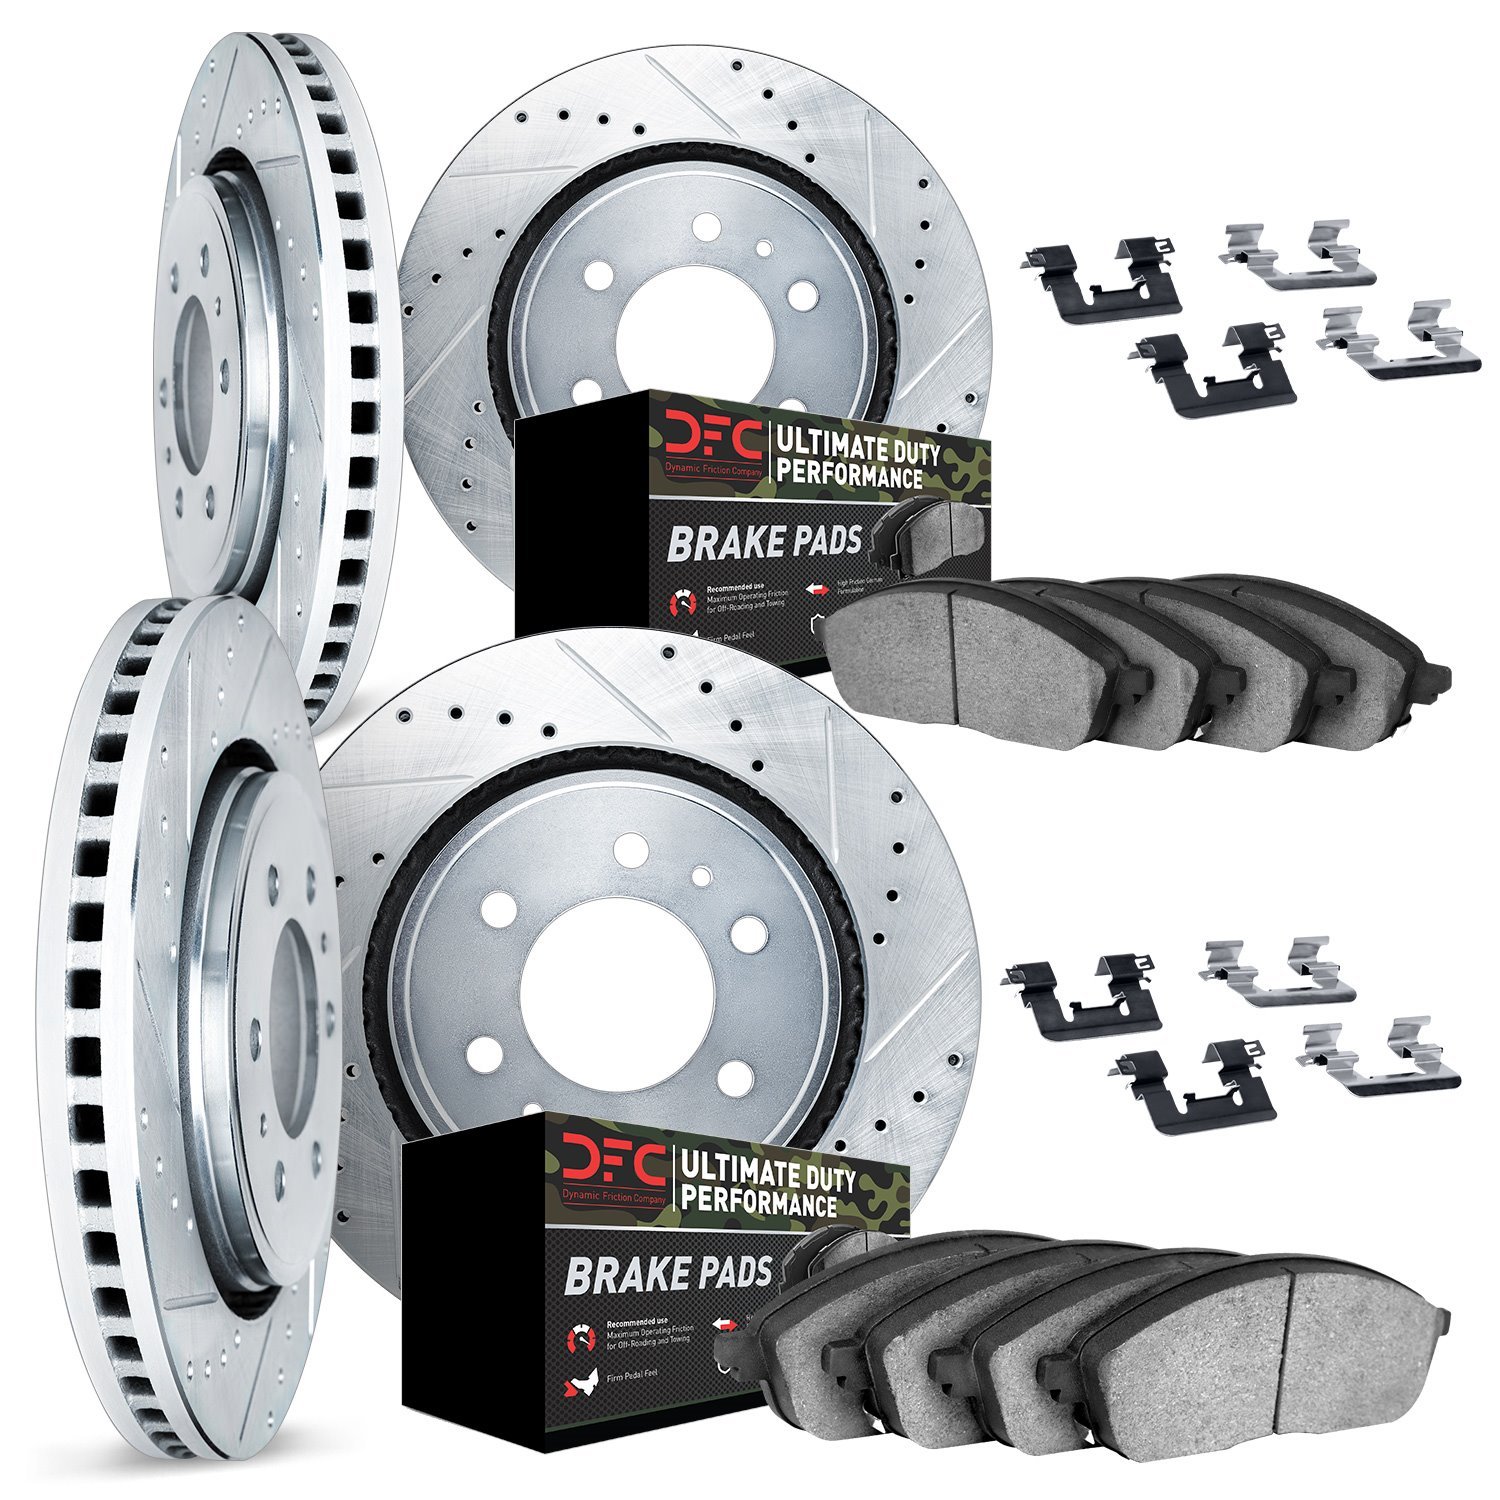 7414-67005 Drilled/Slotted Brake Rotors with Ultimate-Duty Brake Pads Kit & Hardware [Silver], Fits Select Infiniti/Nissan, Posi